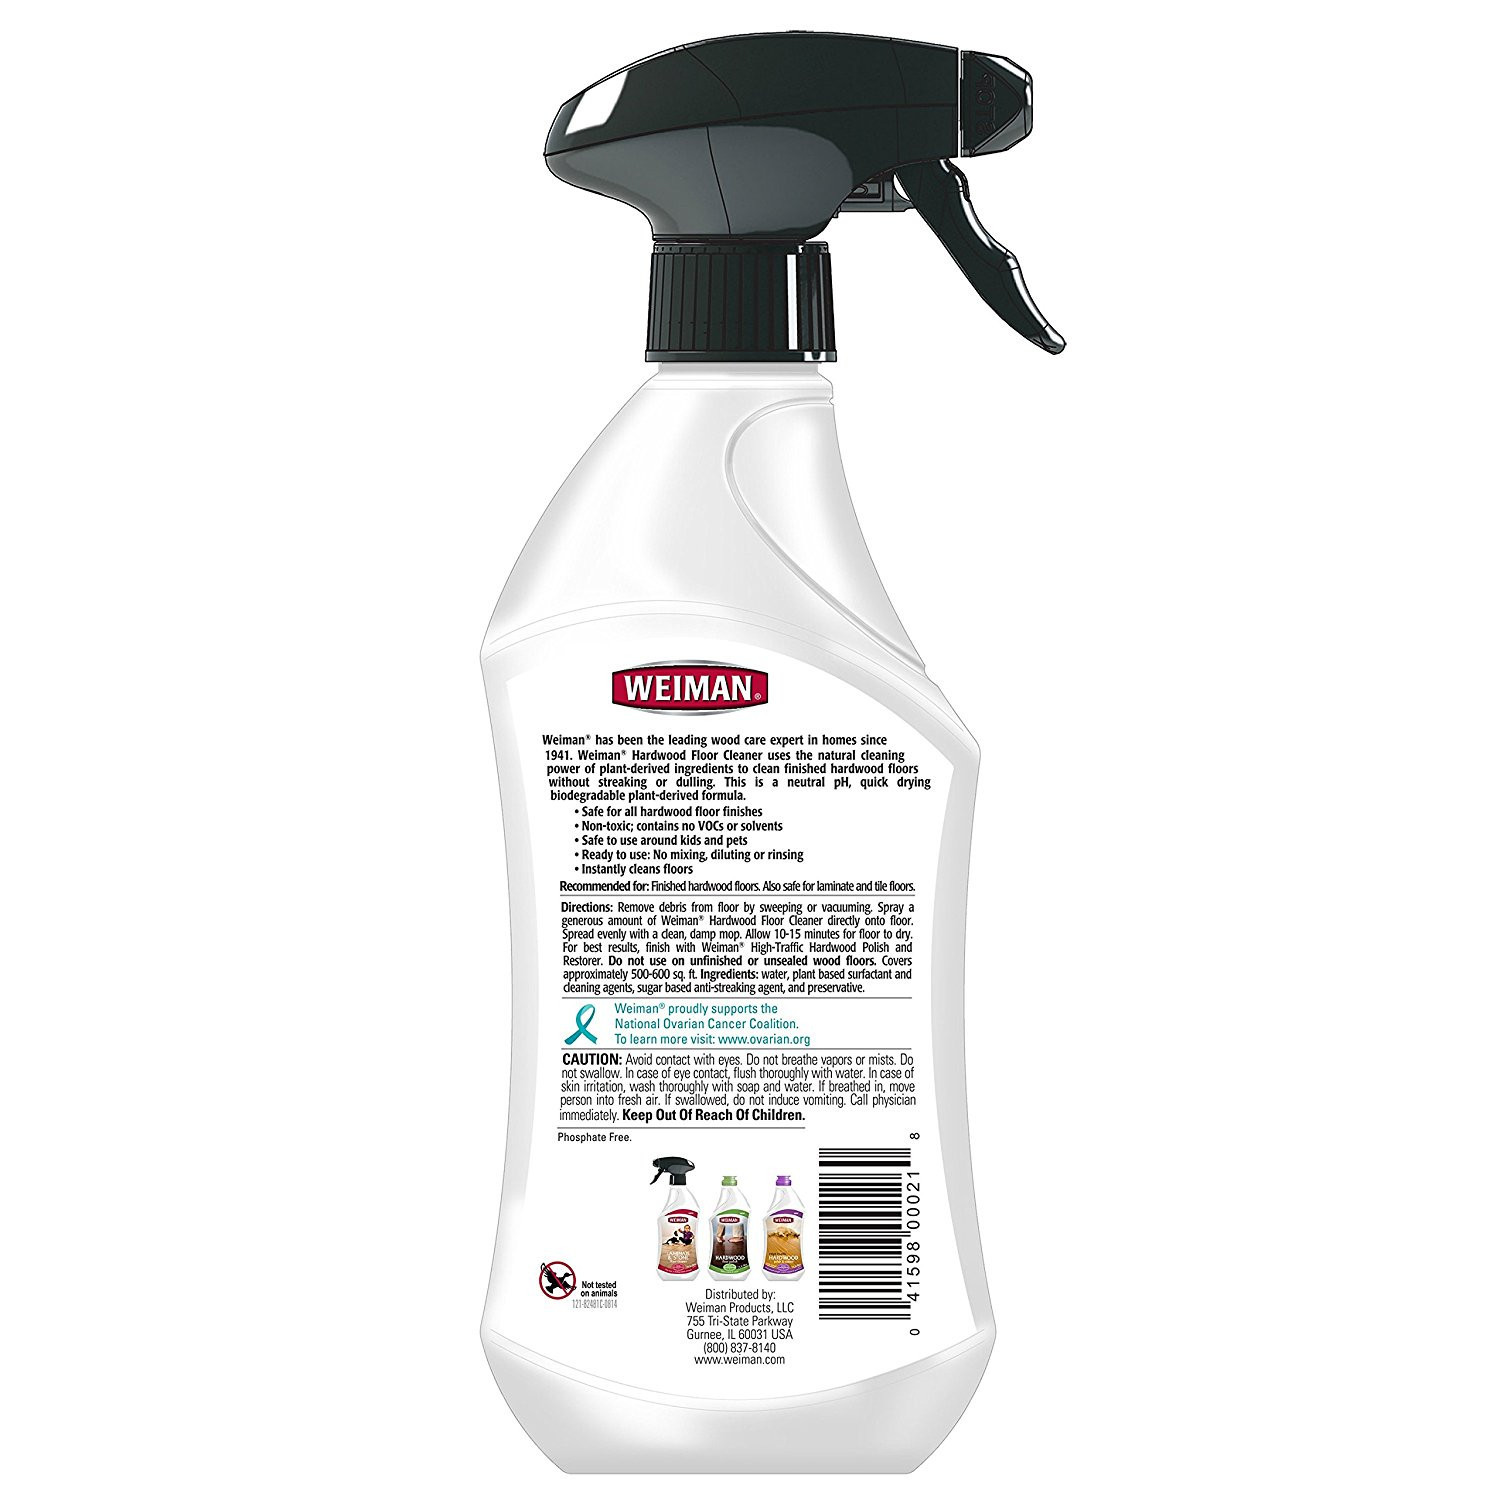 22 Awesome Bona Hardwood Floor Cleaner Refill 128 Oz 2024 free download bona hardwood floor cleaner refill 128 oz of how to use bona tile cleaner unique mesmerizing laminate floor pertaining to how to use bona tile cleaner unique hardwood floor cleaning bona cle